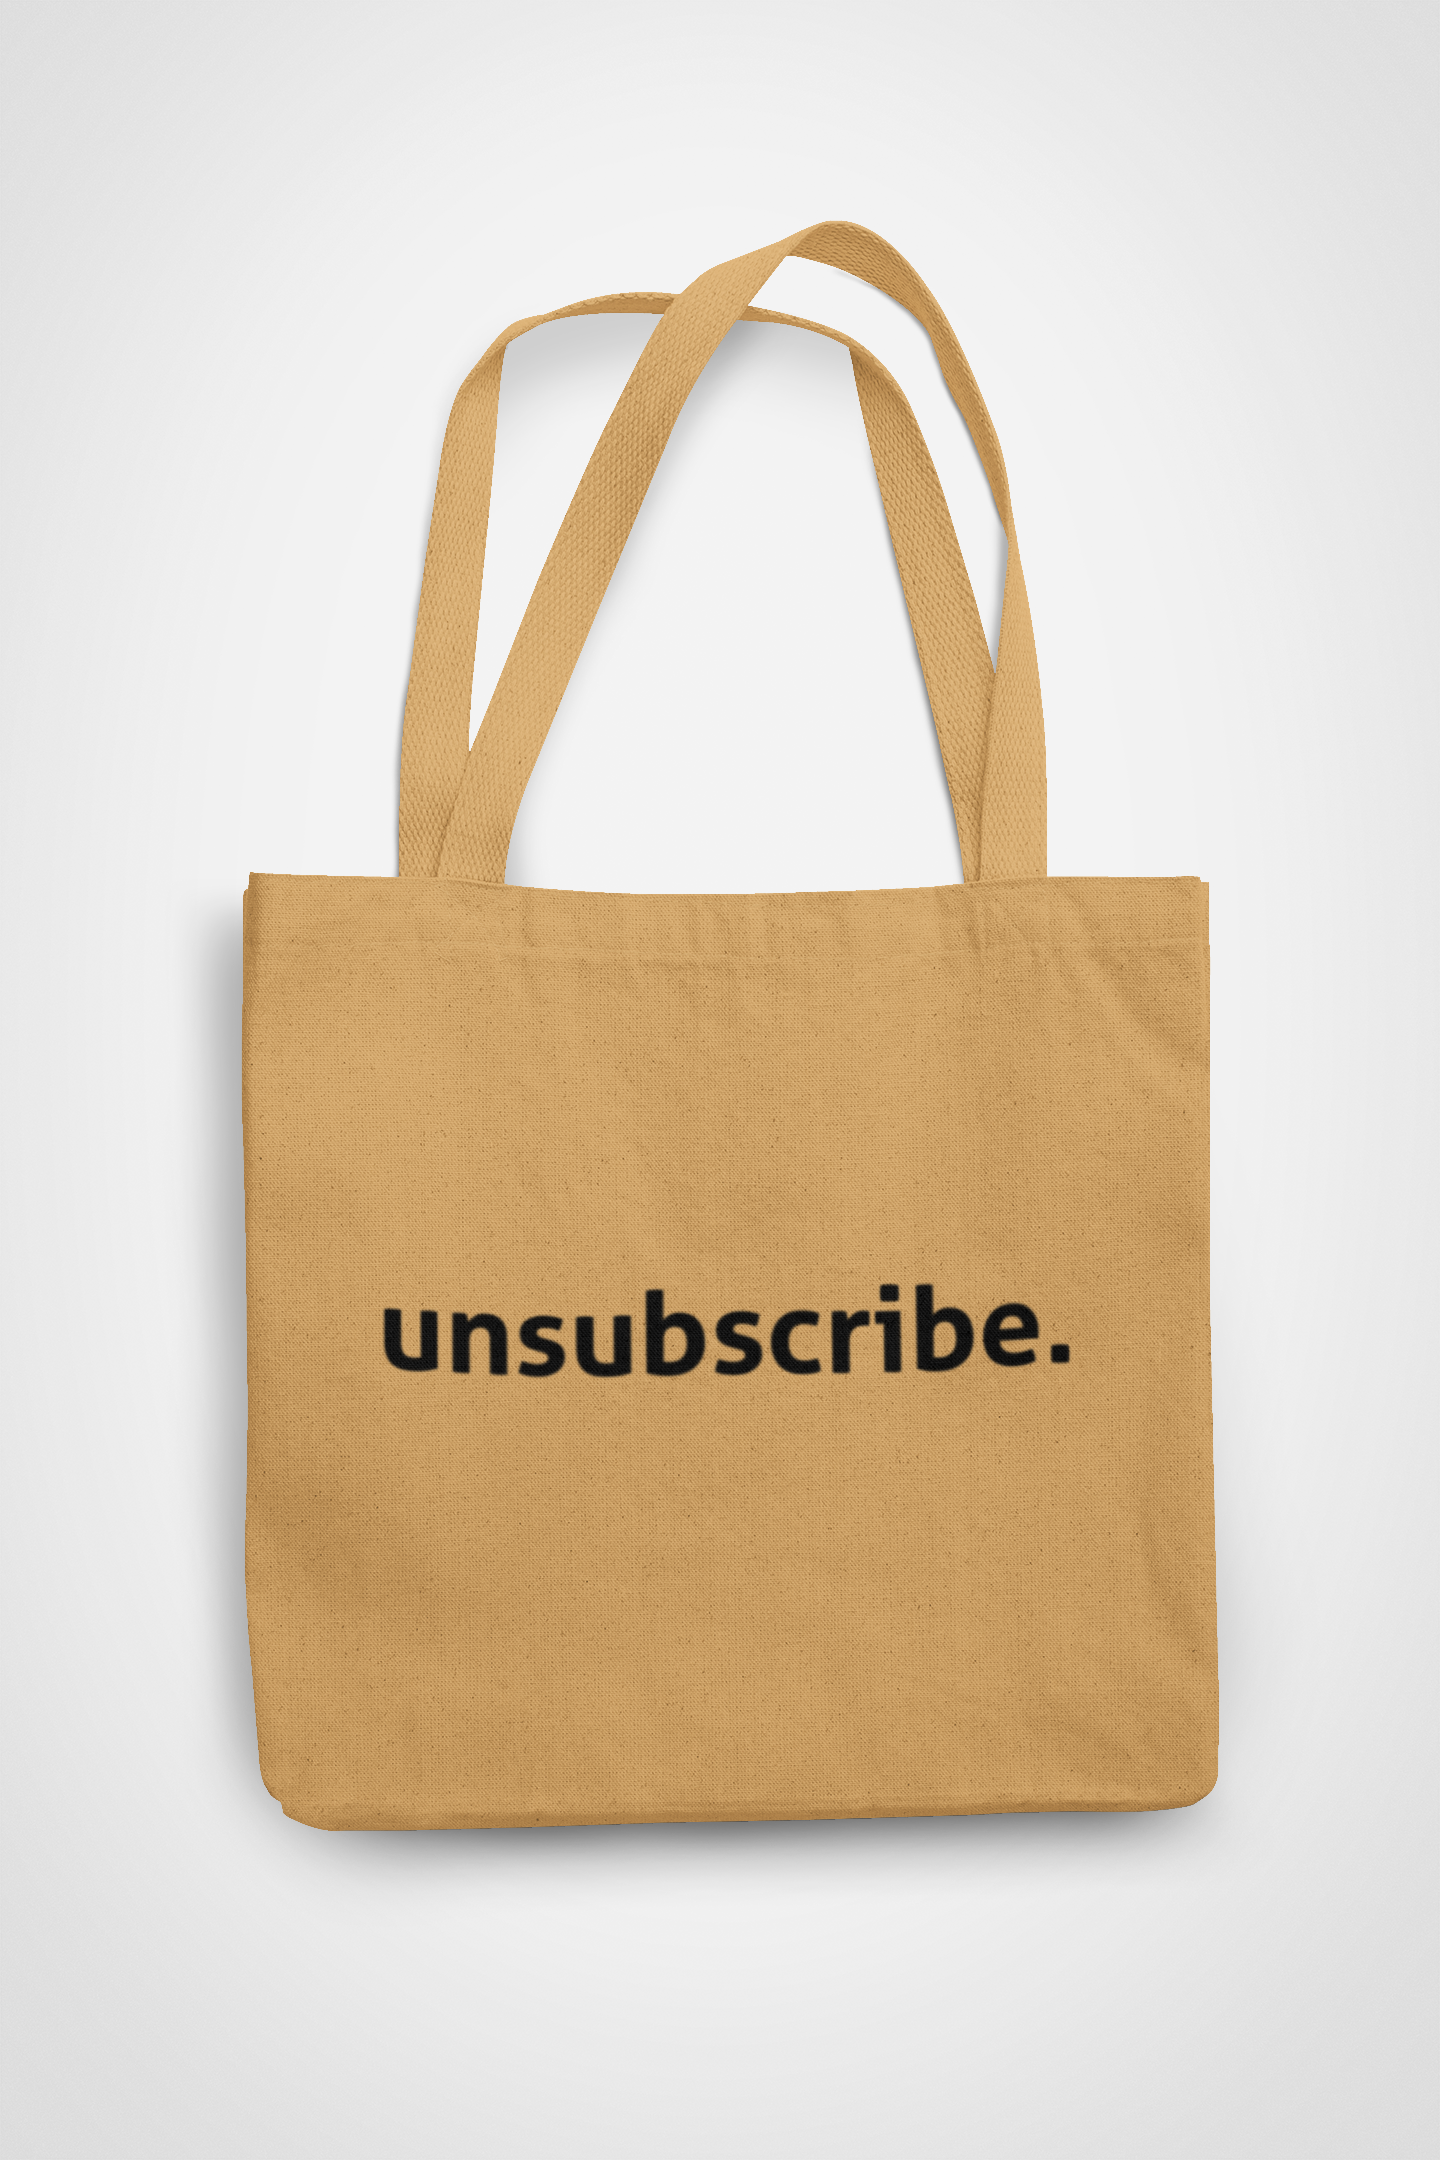 Zipped Tote Bag - Unsubscribe